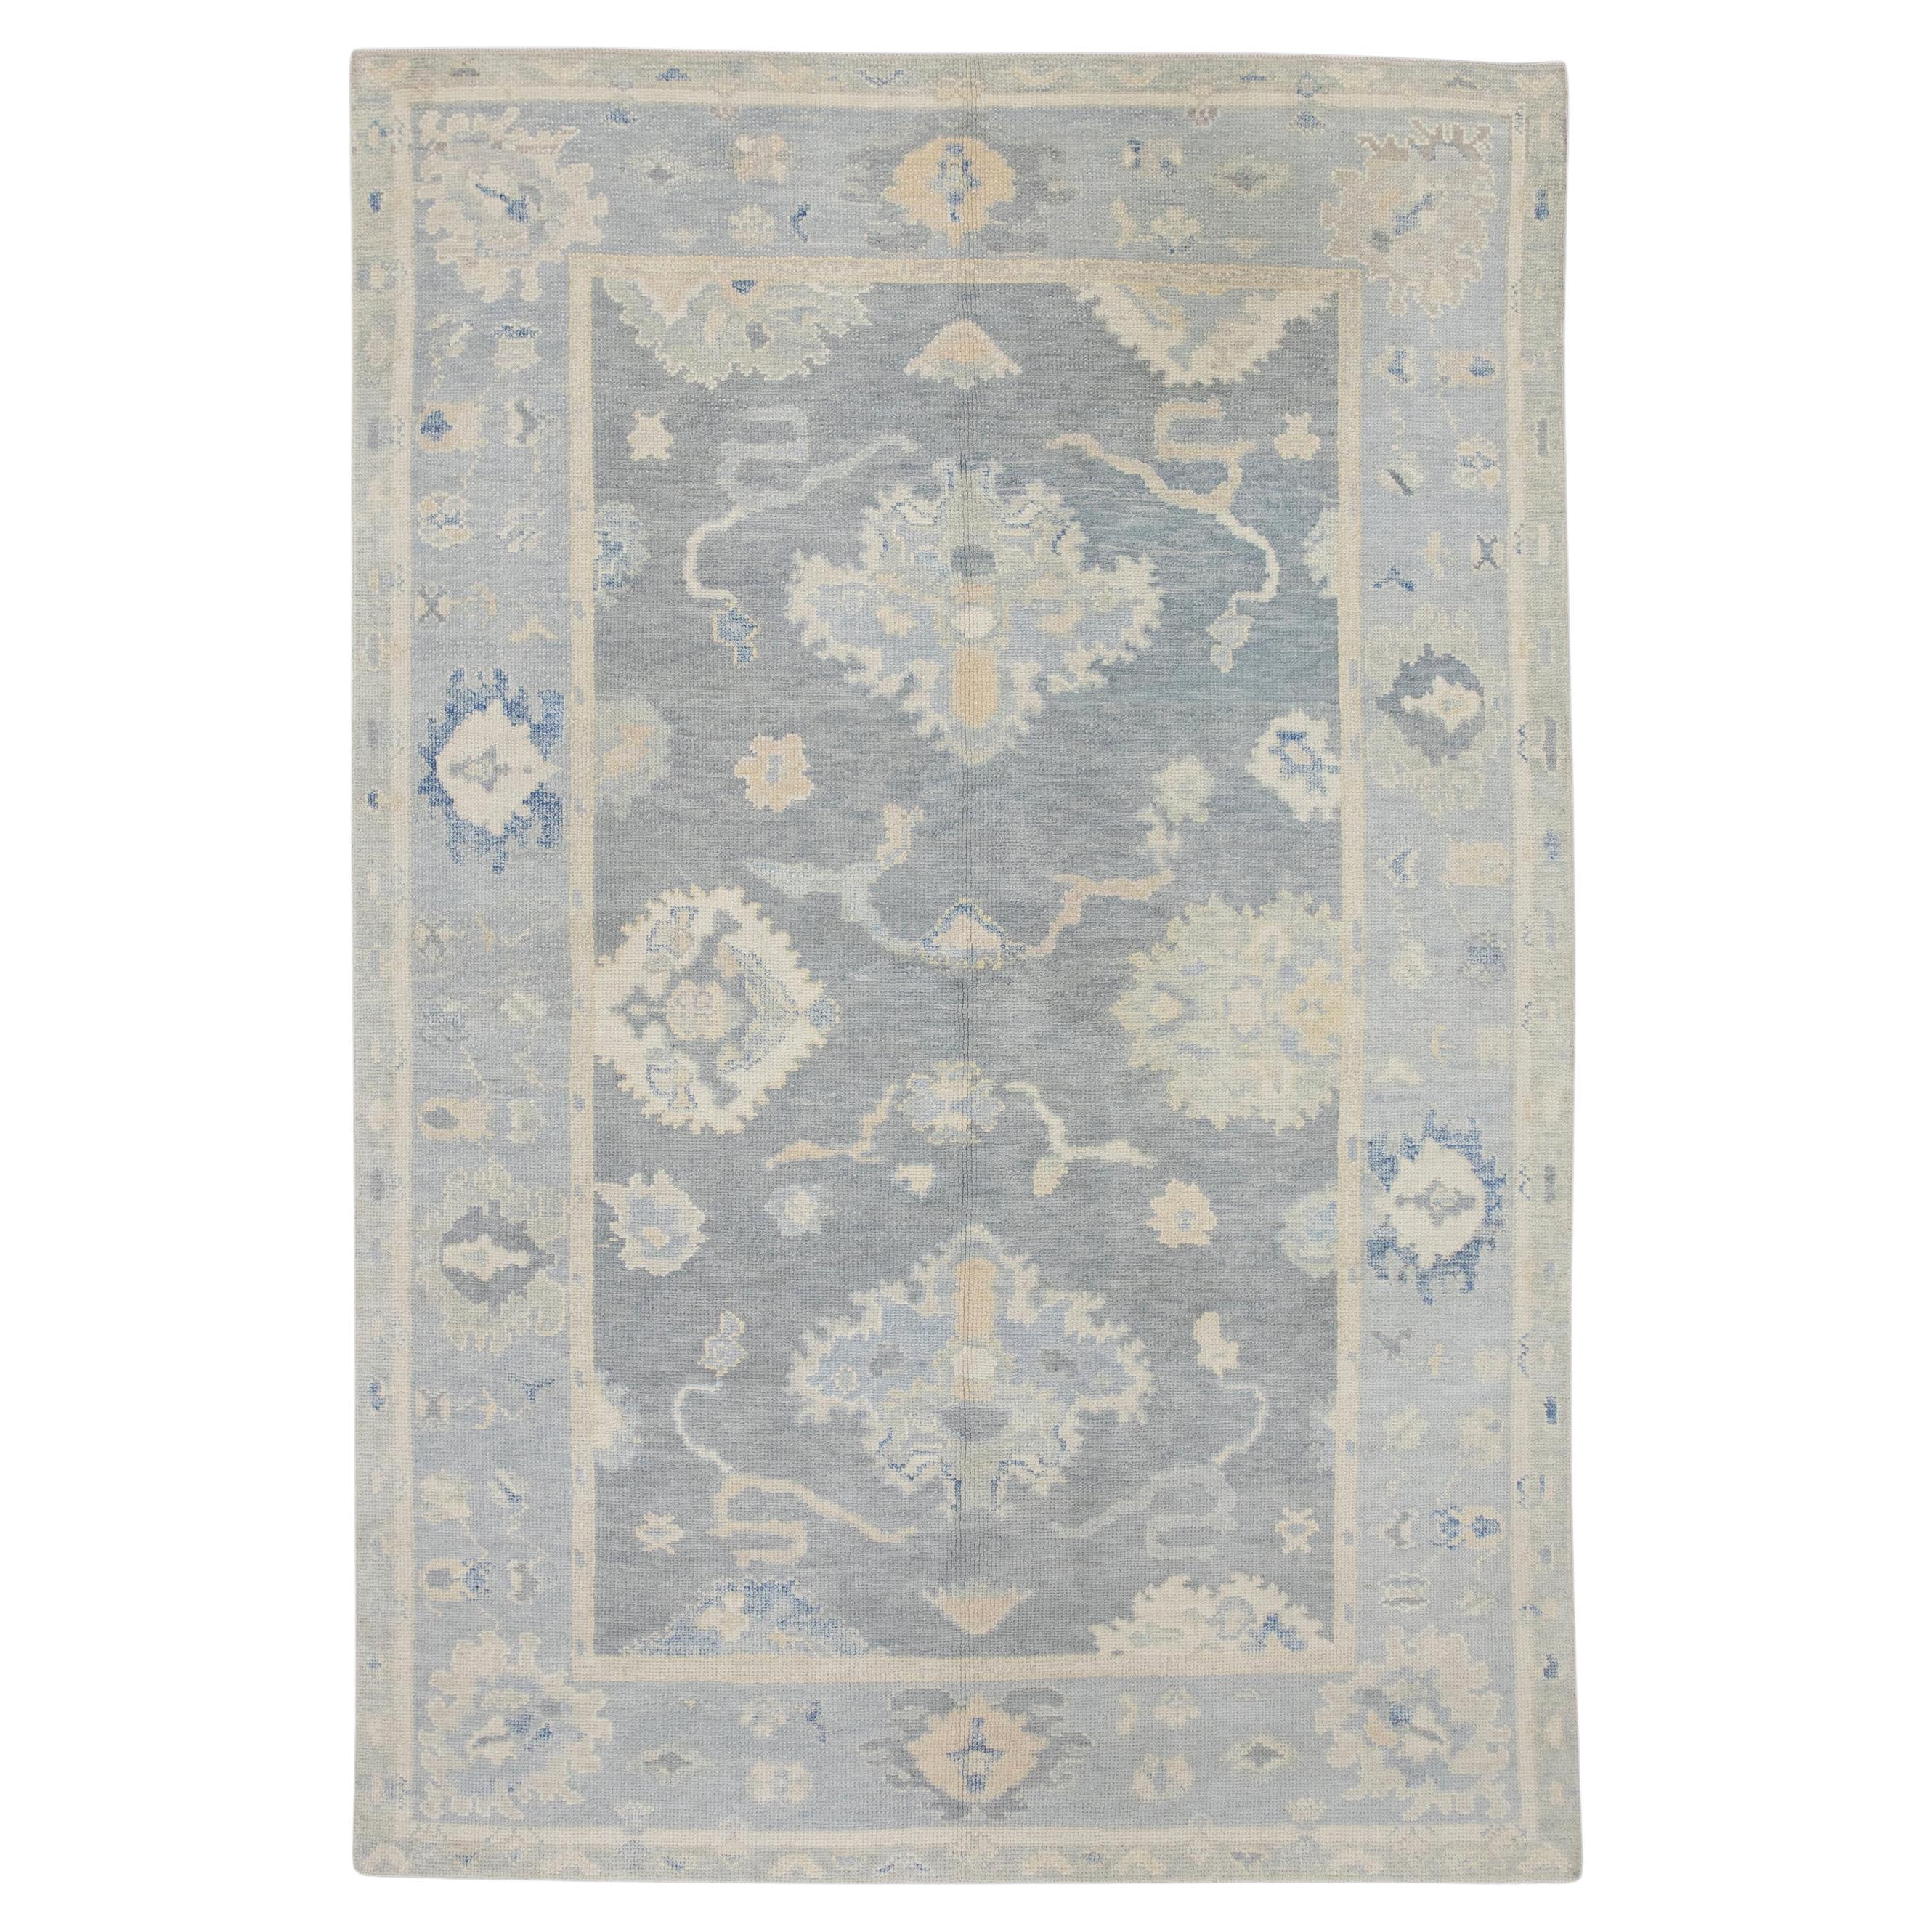 Blue Handwoven Wool Turkish Oushak Rug in Floral Design 5'10" x 8'6" For Sale